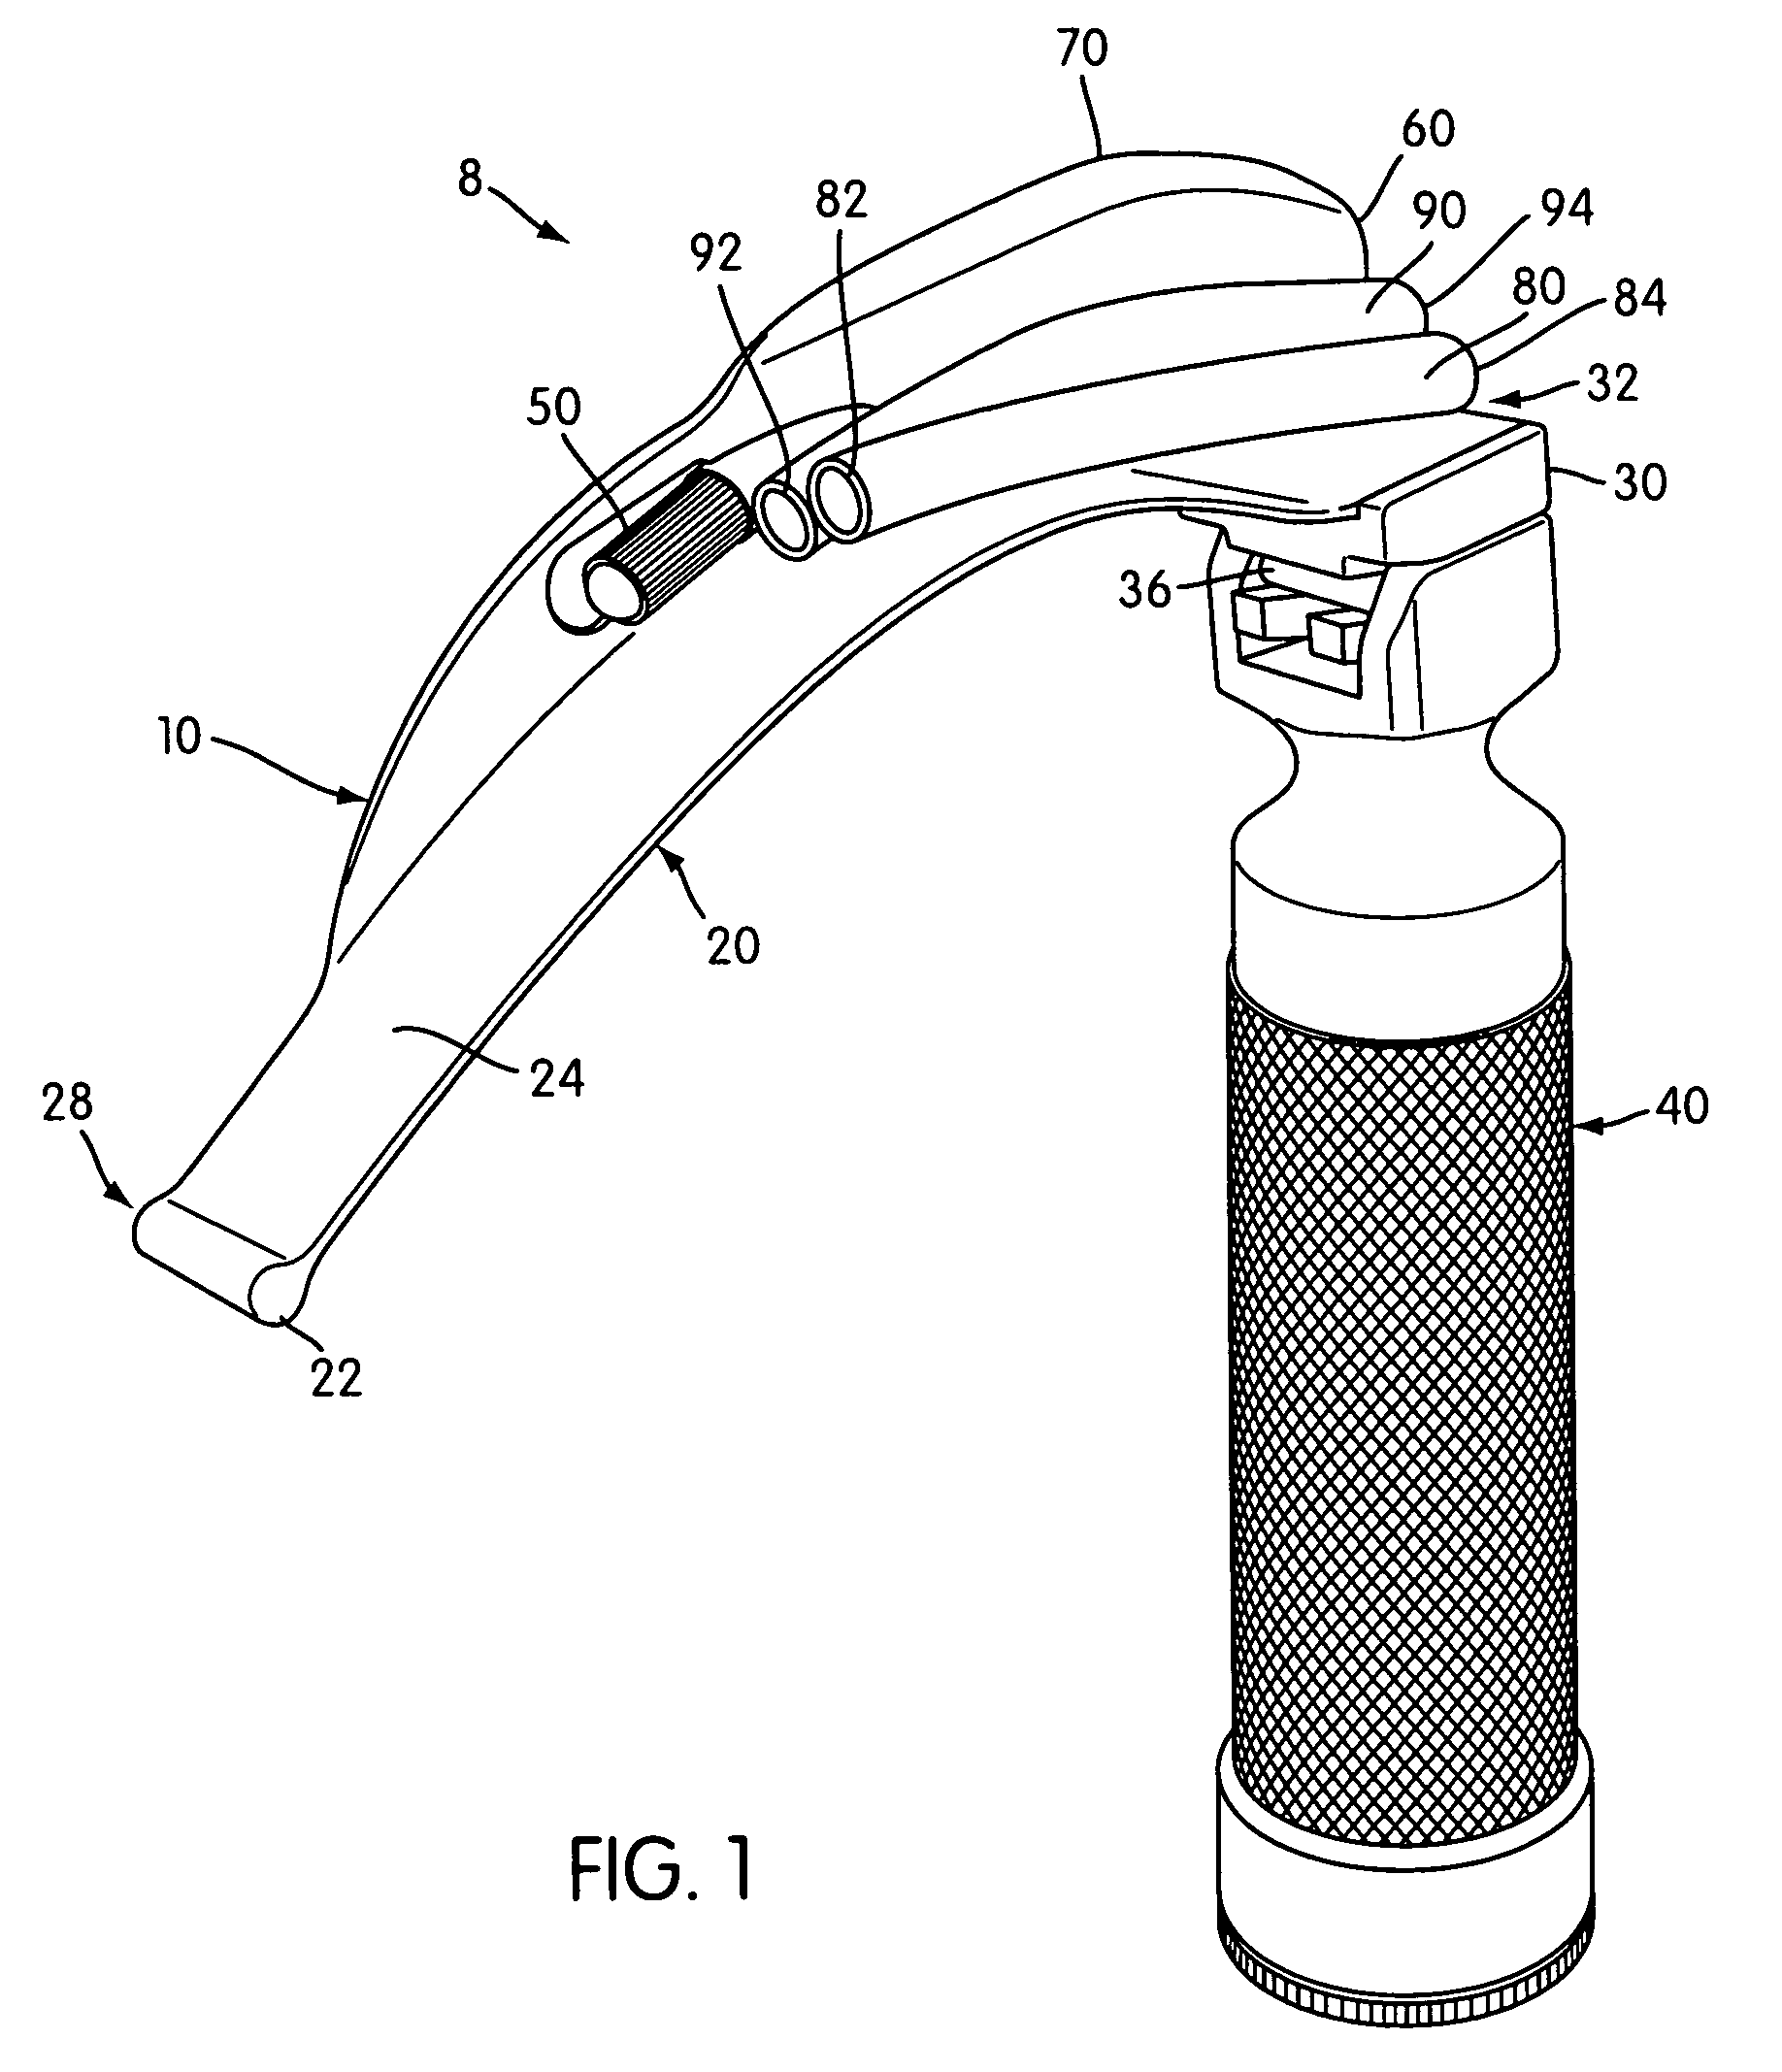 Device to aid in placing tracheal tubes